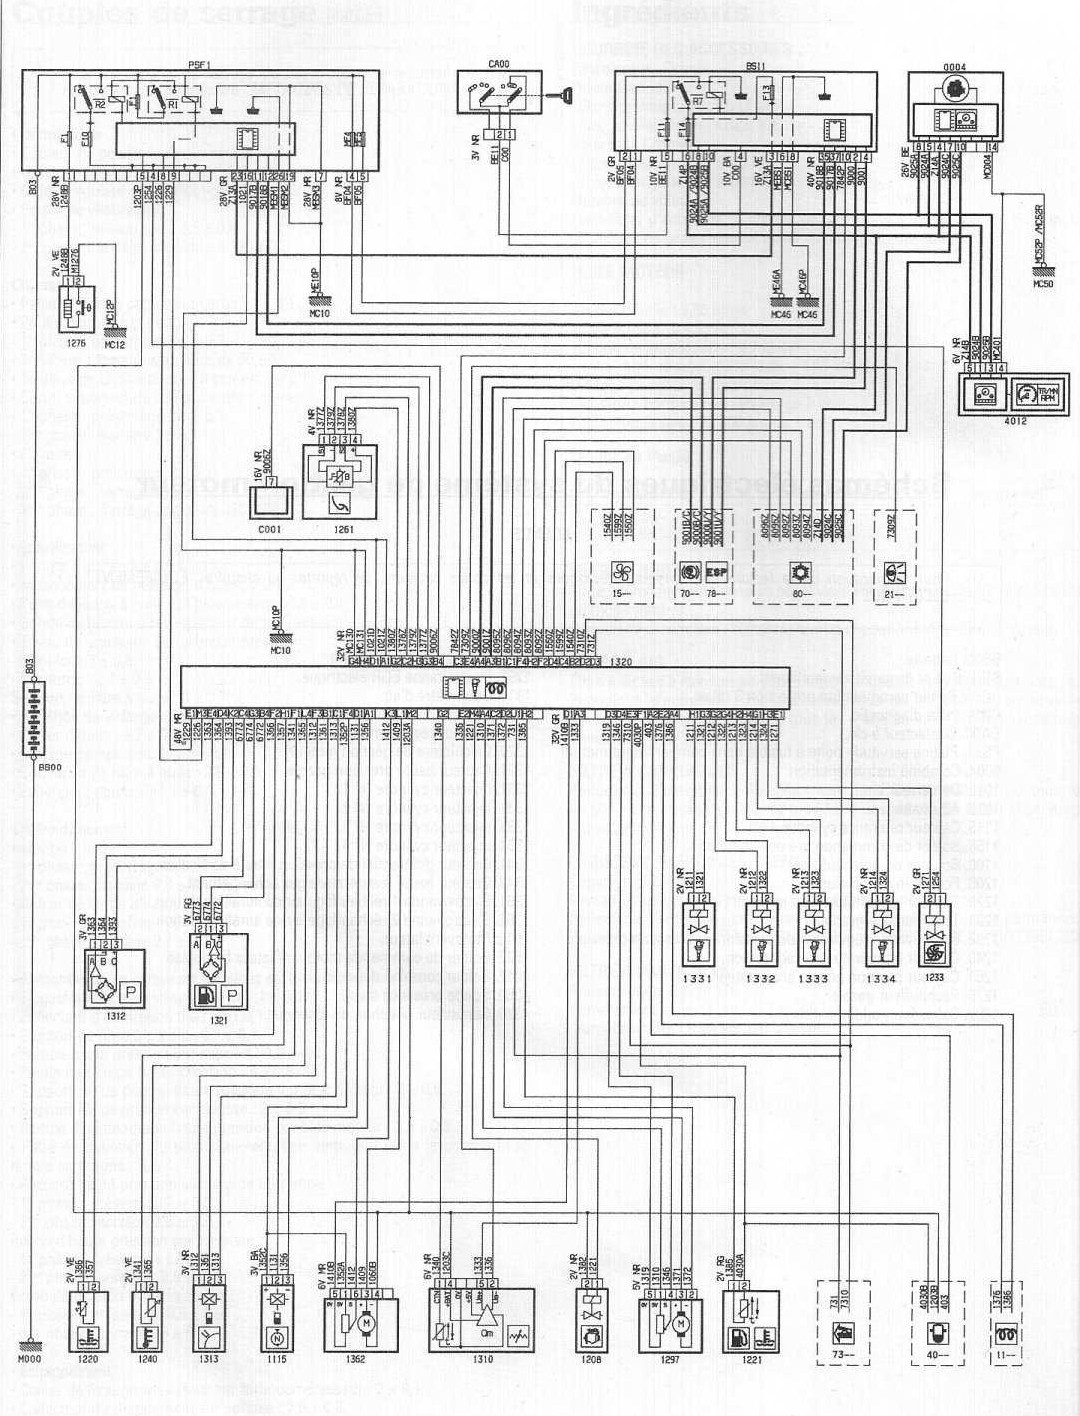 1.6hdi no start, wiring diagram needed | aussiefrogs - The Australian